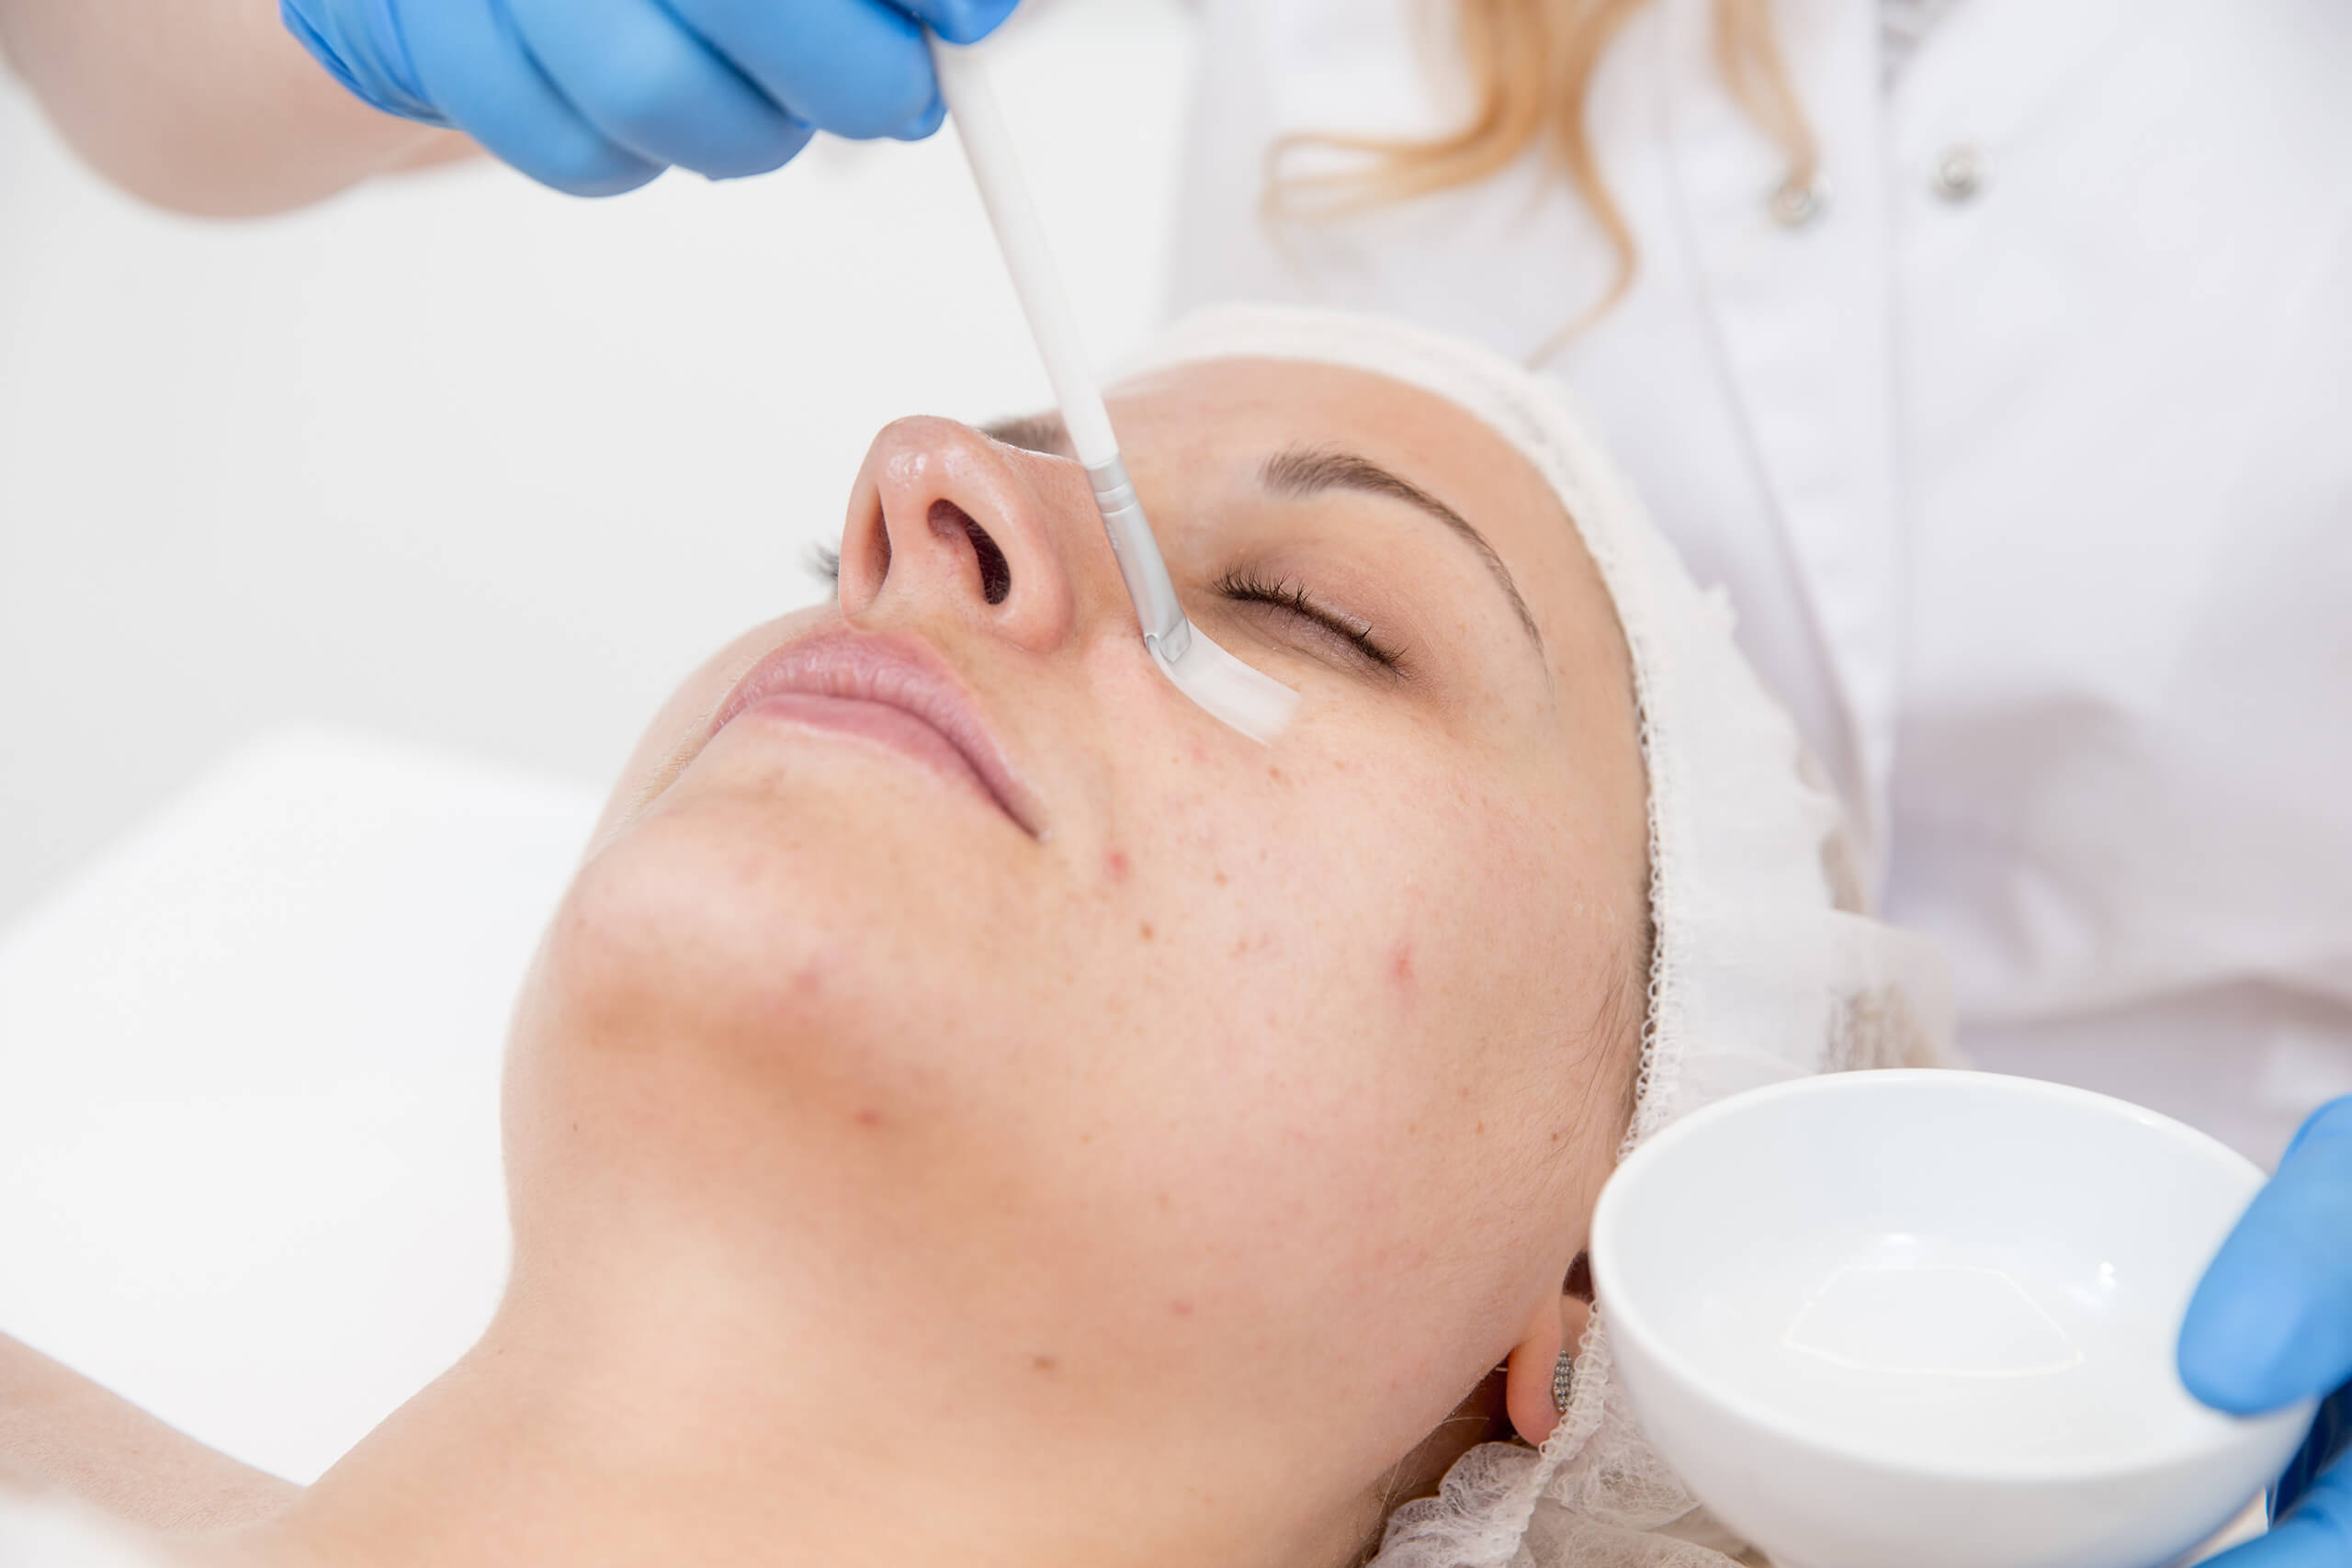 A woman gets a chemical peel at a dermatologist's office